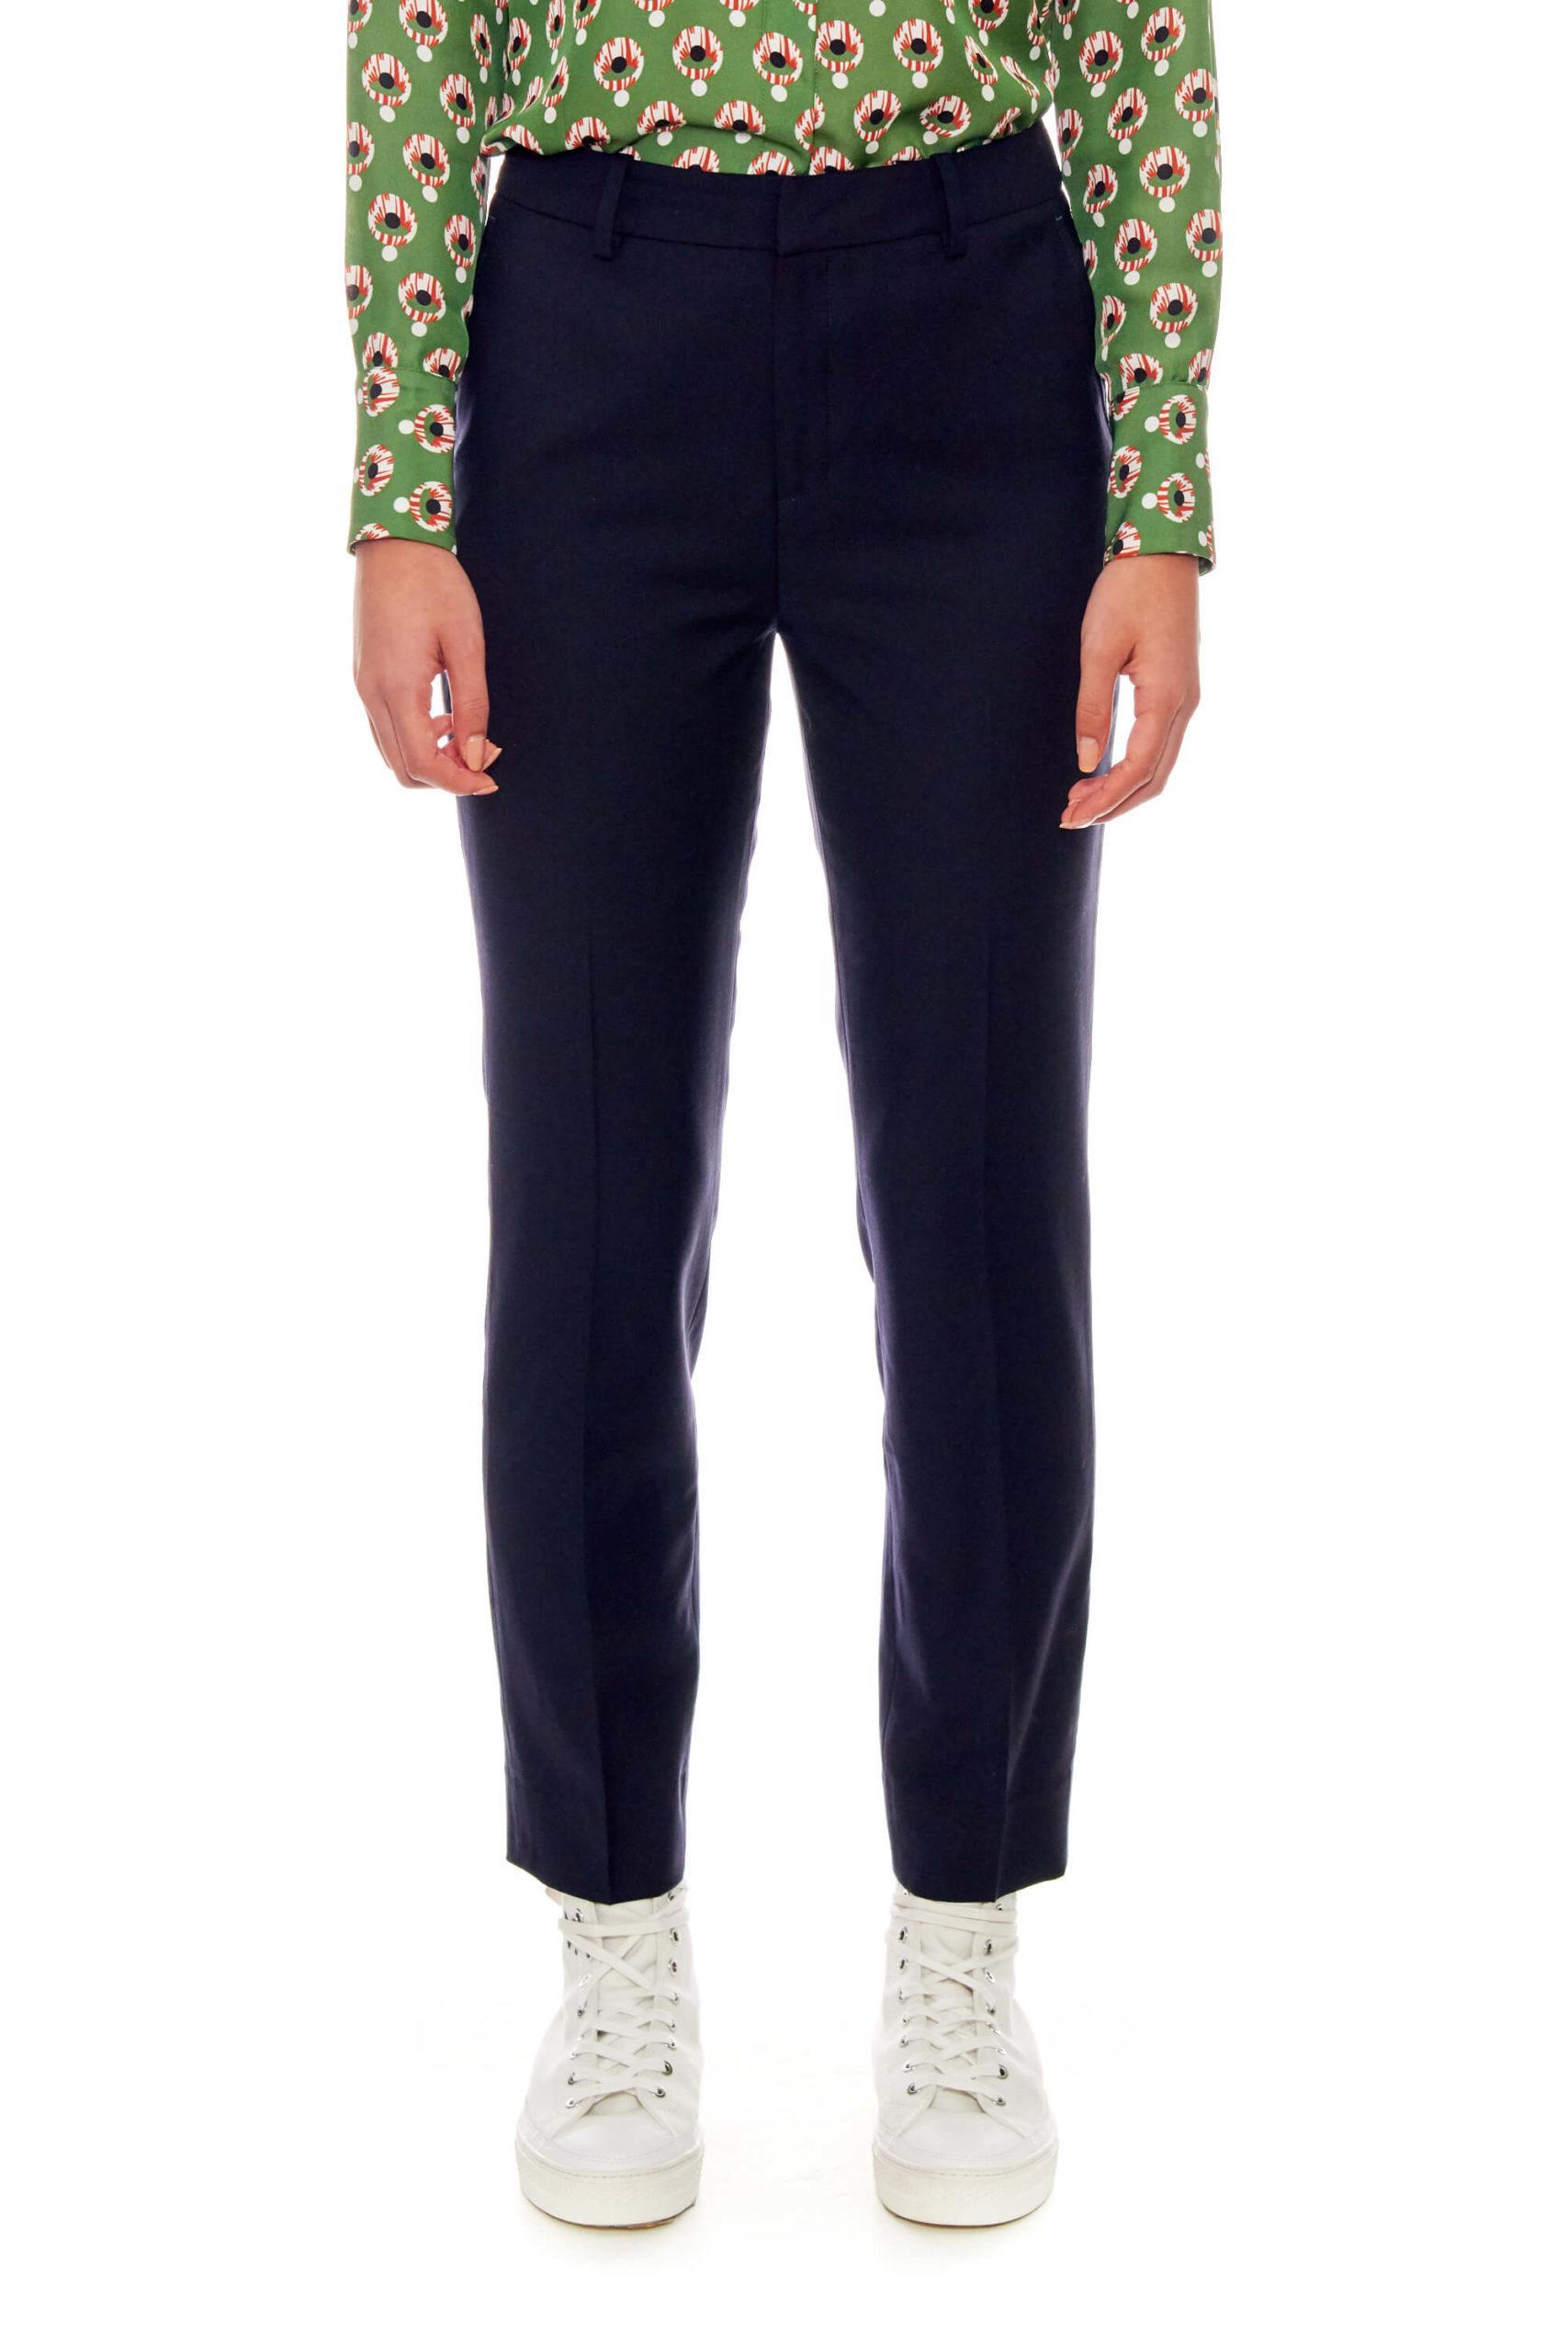 Dunkirk – High-waisted cigarette trousers in navy